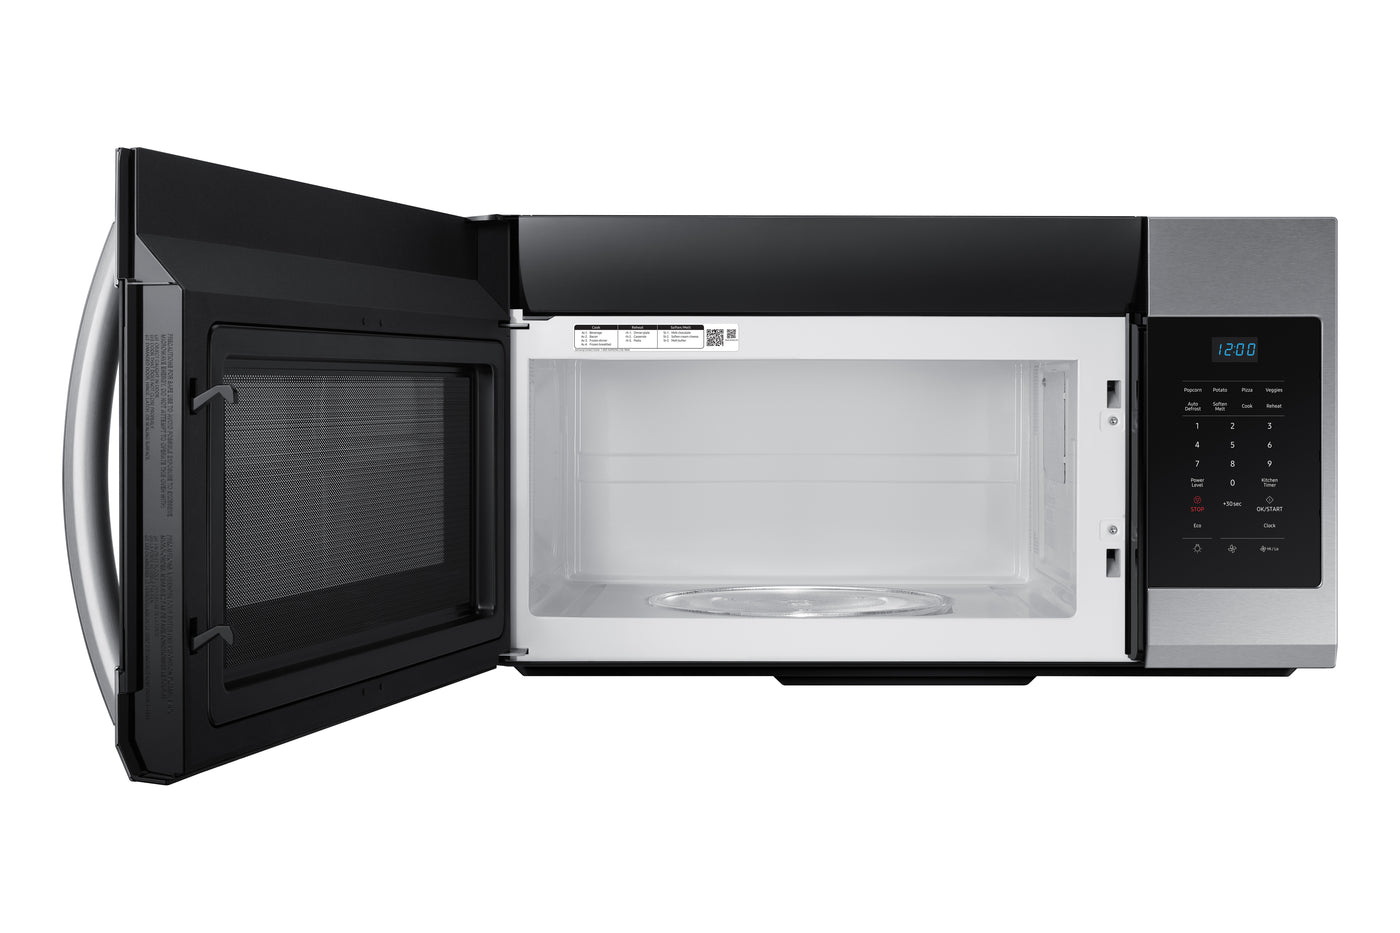 Samsung Stainless Steel Over-the-Range Microwave (1.7 Cu.Ft) - ME17R7011ES/AC